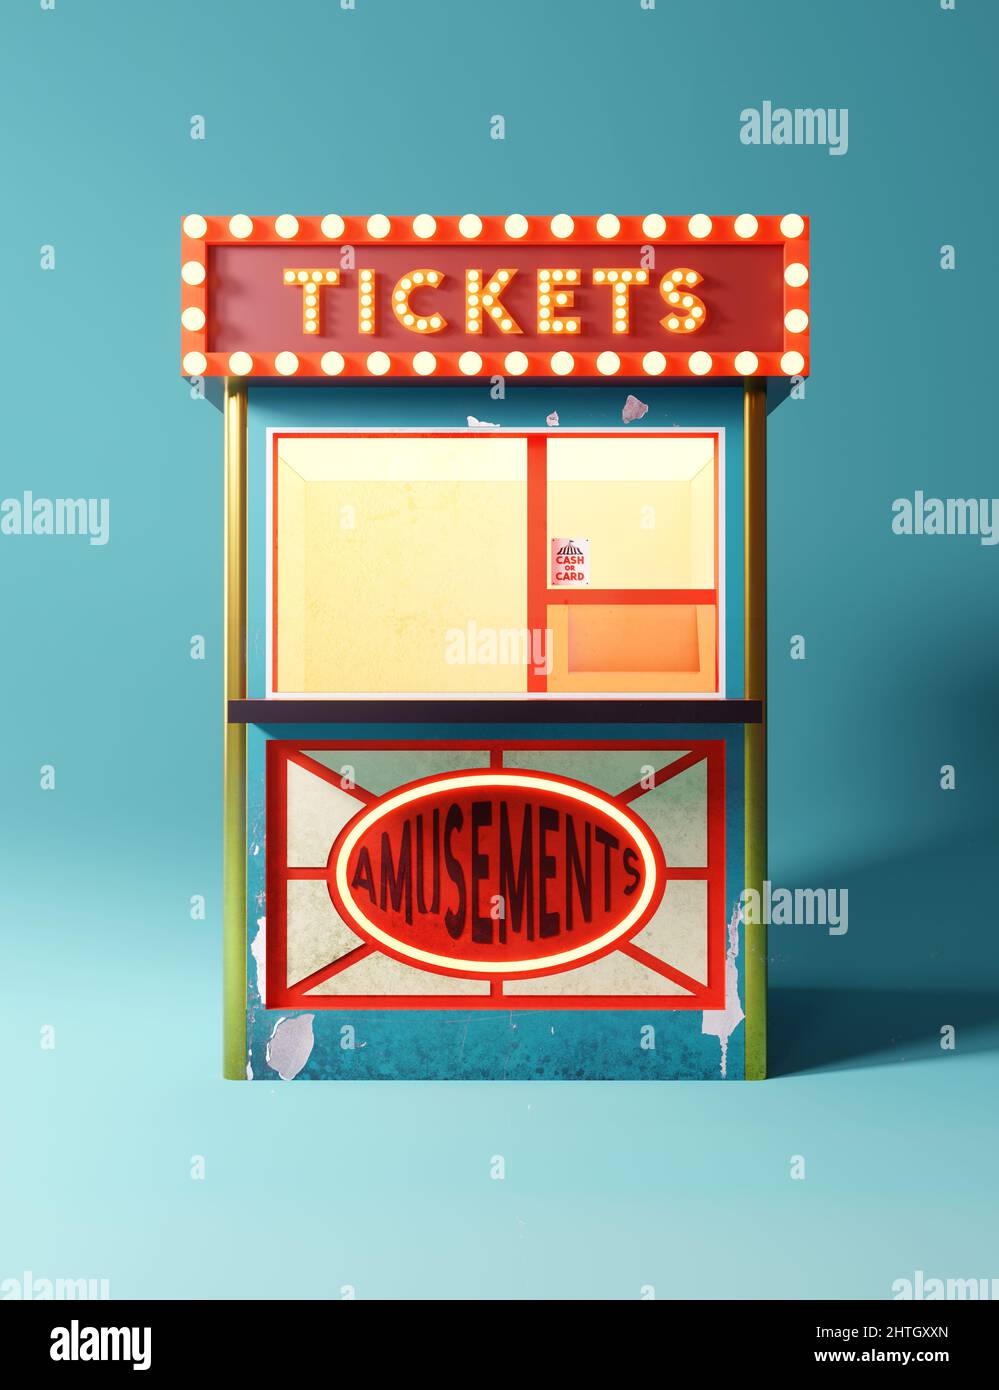 Vintage ticket sales booth for amusement parks and performance events. 3D illustration Stock Photo